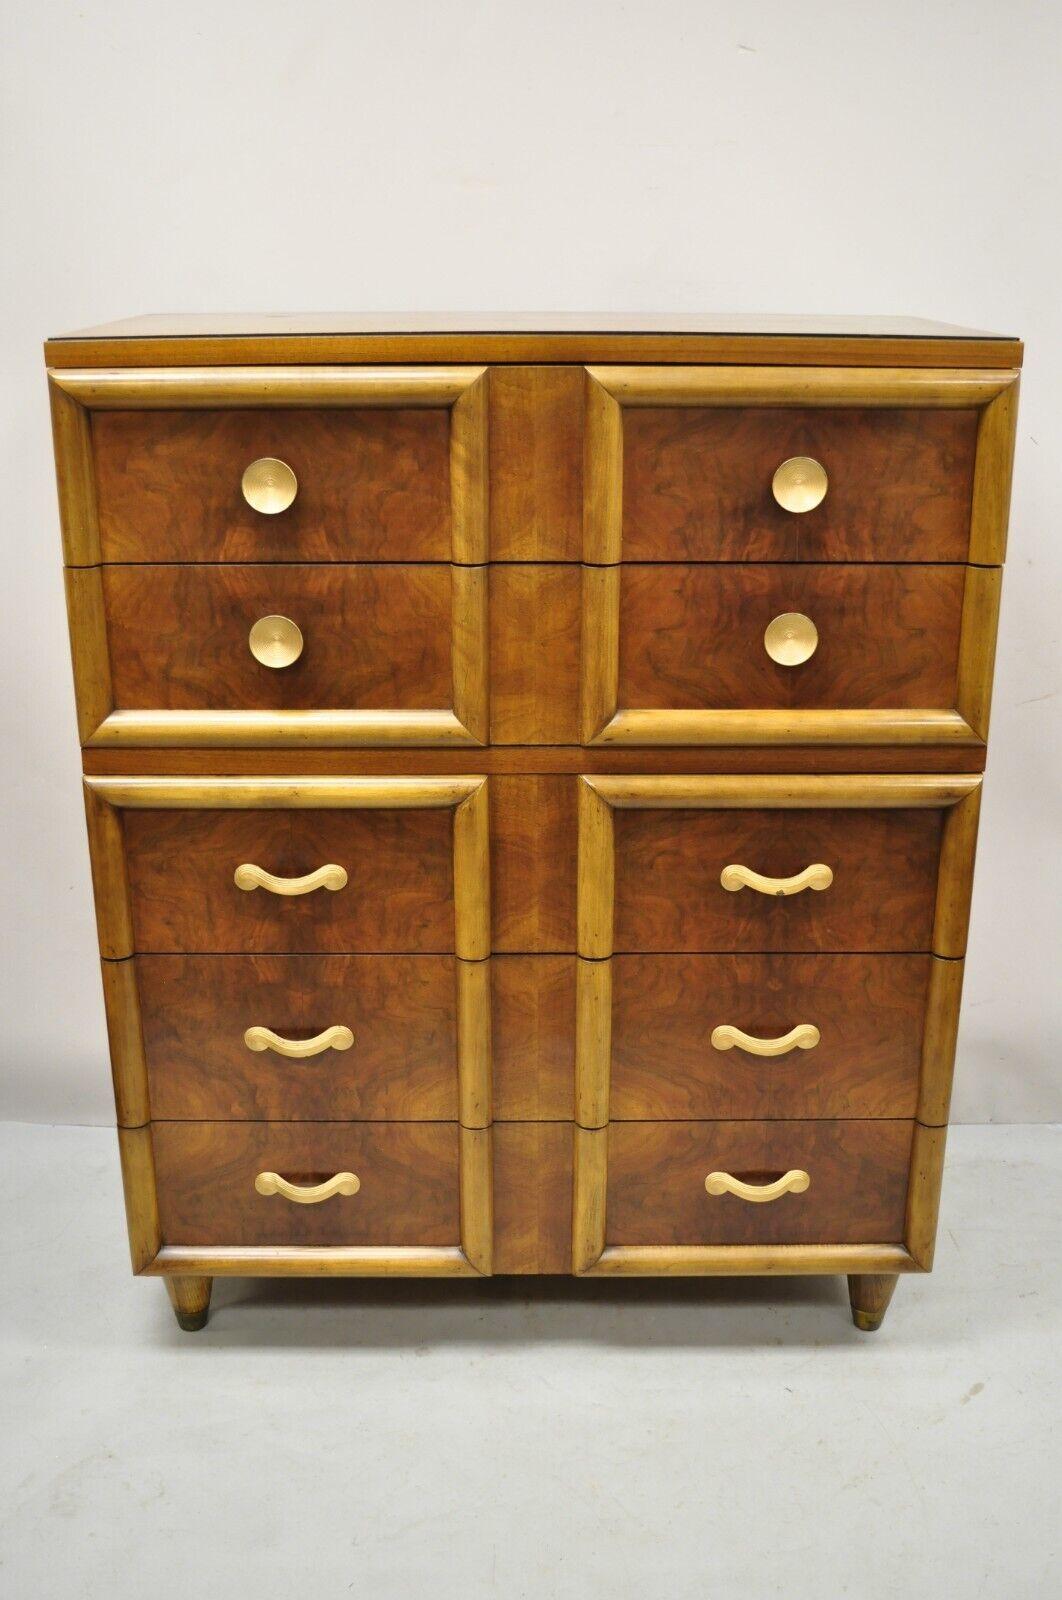 Joerns Bros Art Deco Mid Century Burl Walnut Tall Chest Dresser. Item features brass capped feet, black painted accents, beautiful wood grain, 5 dovetailed drawers, tapered legs, very nice vintage item, quality American craftsmanship, great style